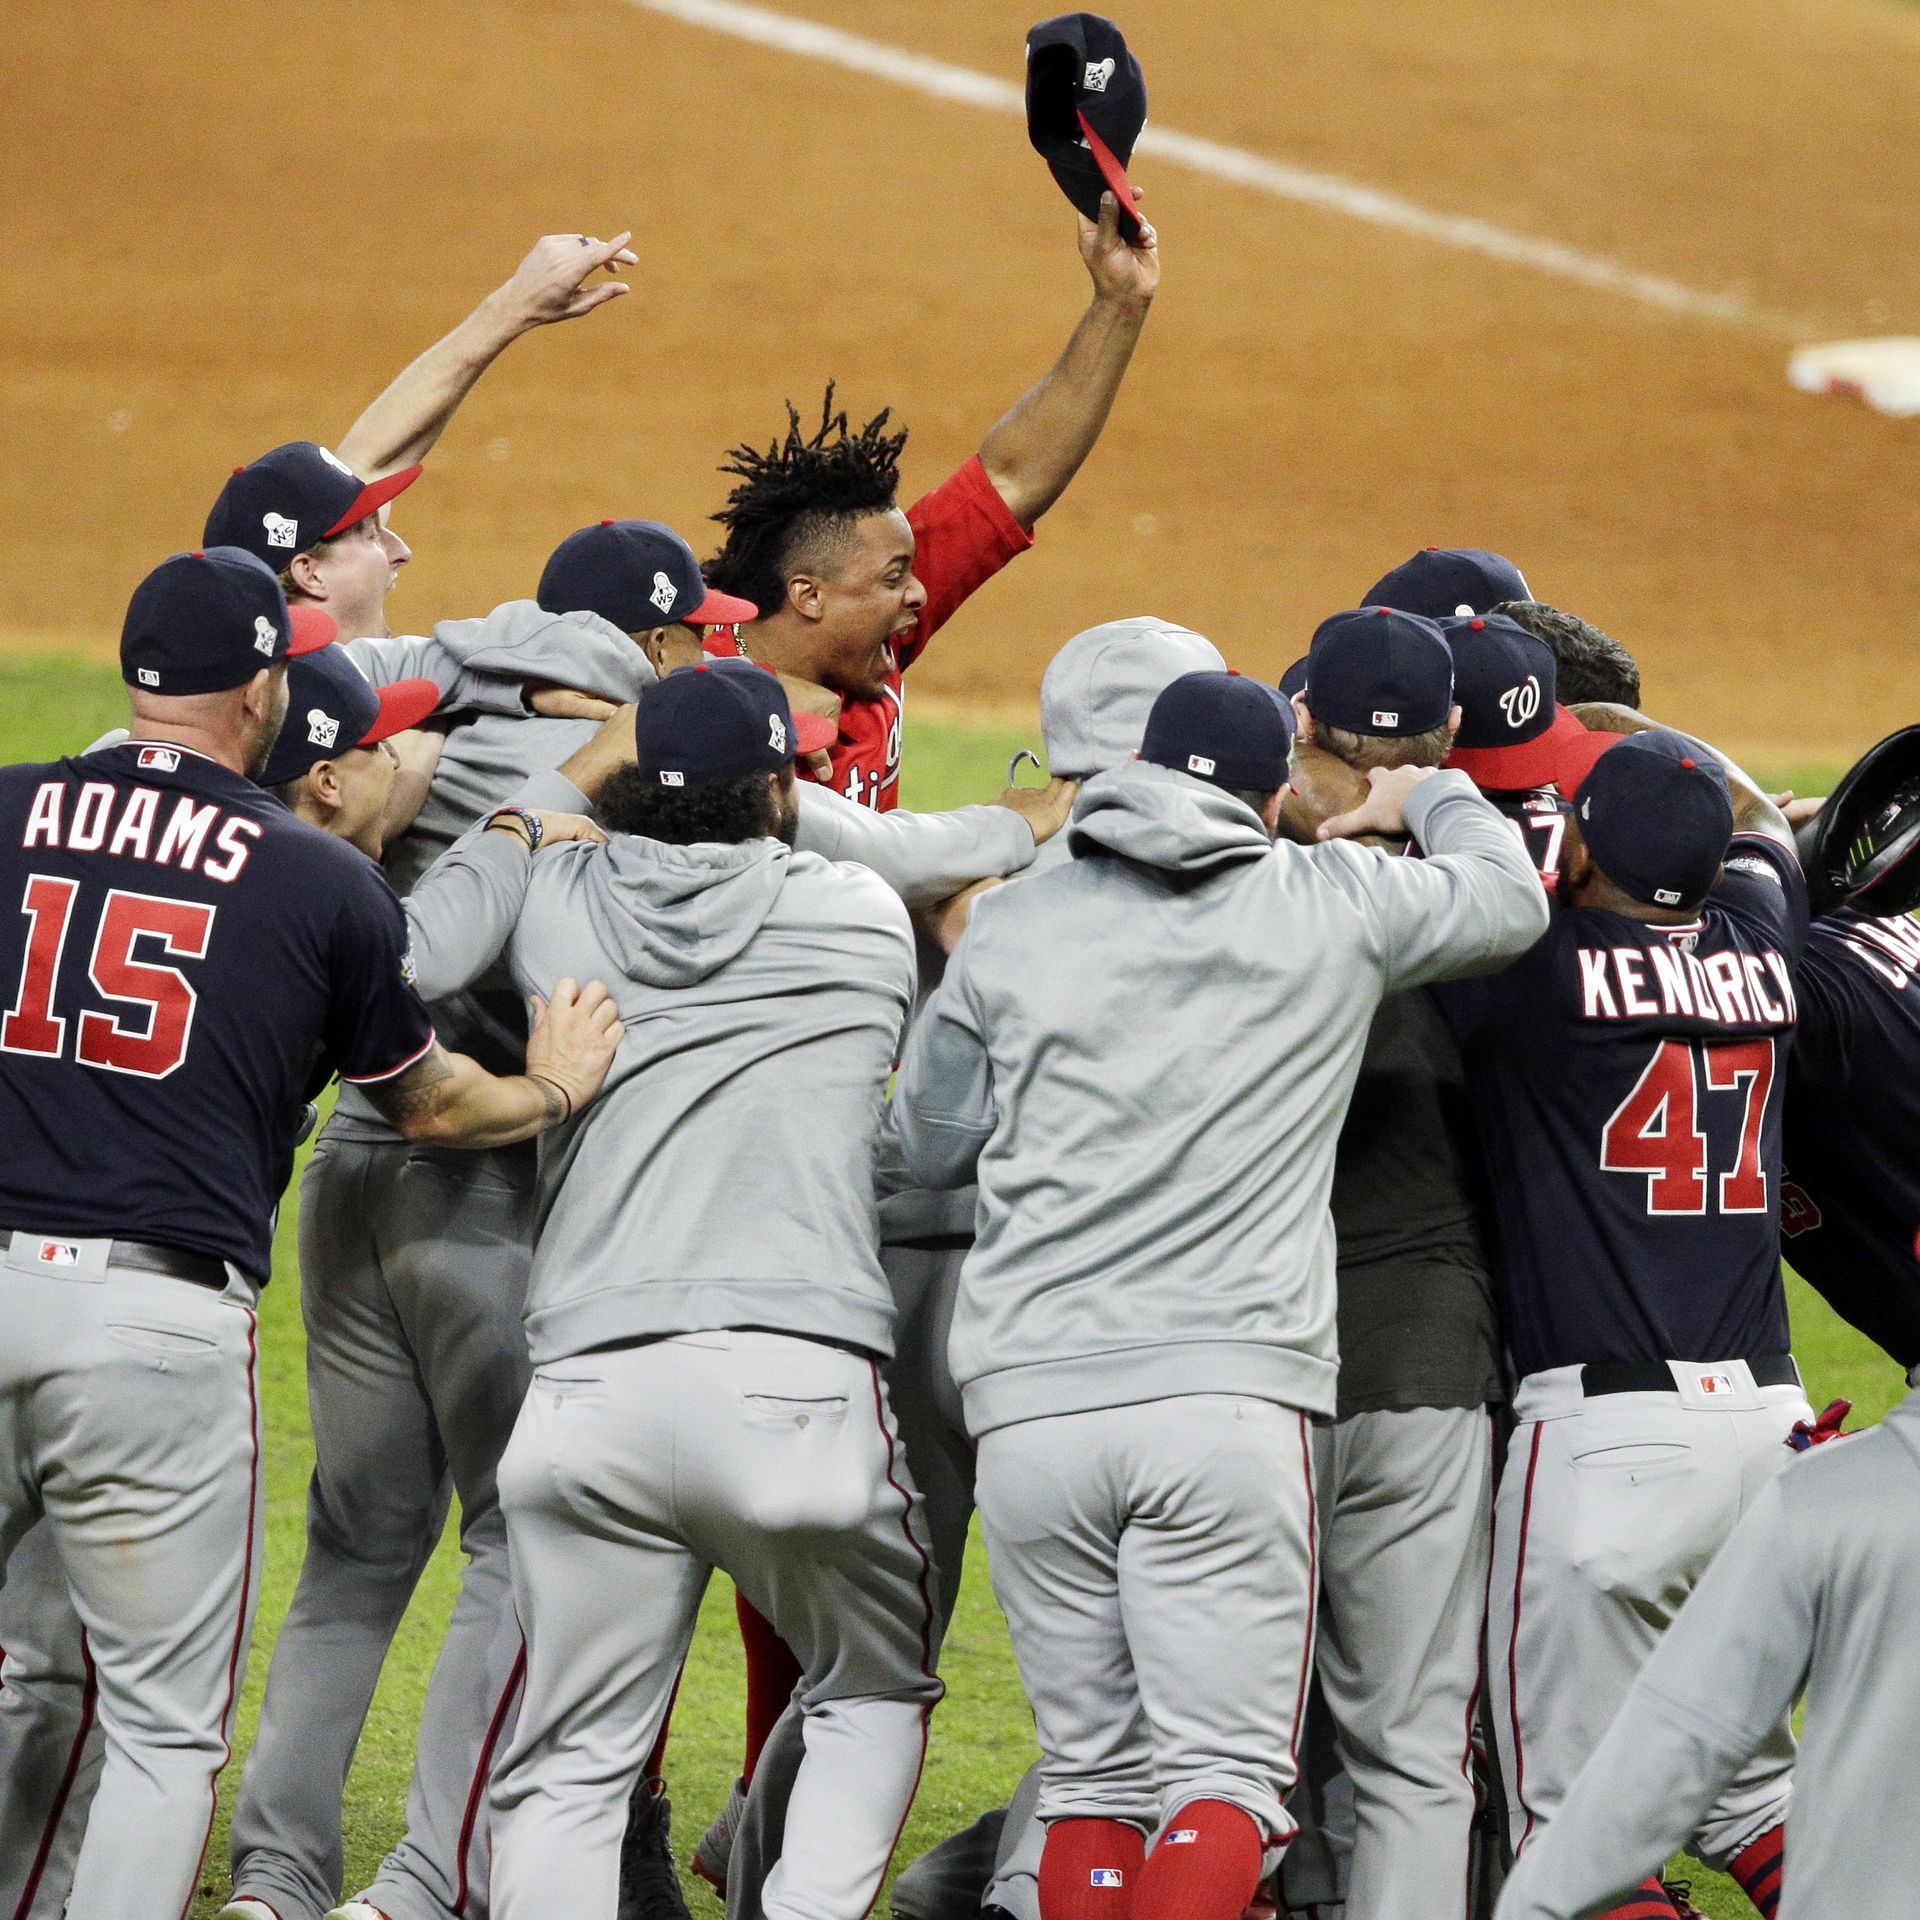 Washington Nationals get final out to win the 2019 World Series